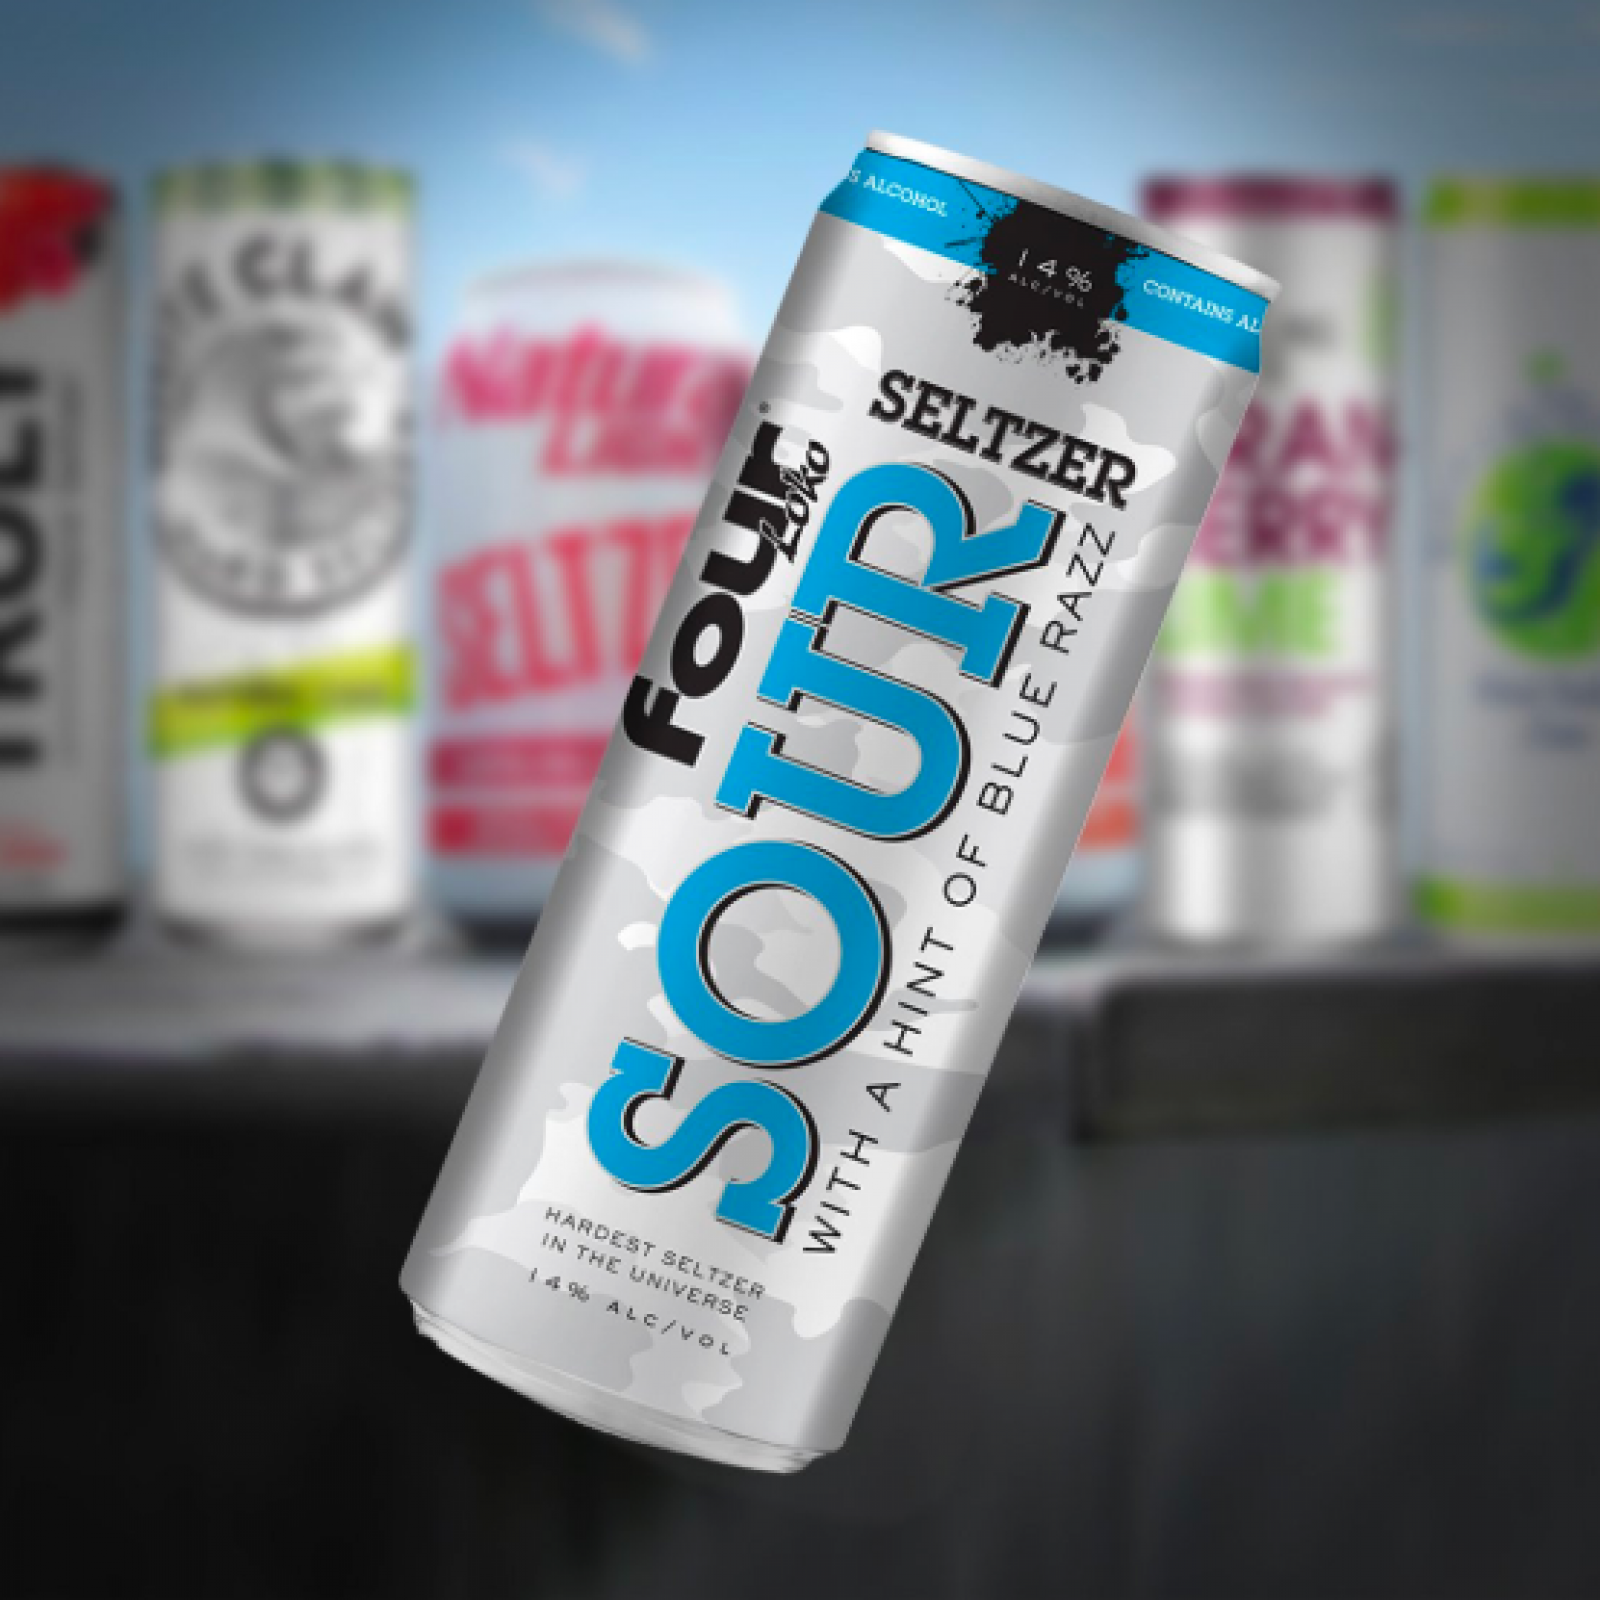 Four Loko Reveals New Sour Hard Seltzer With 14 Percent Alcohol Volume And Now All Of Twitter Is Drunk On Nostalgia